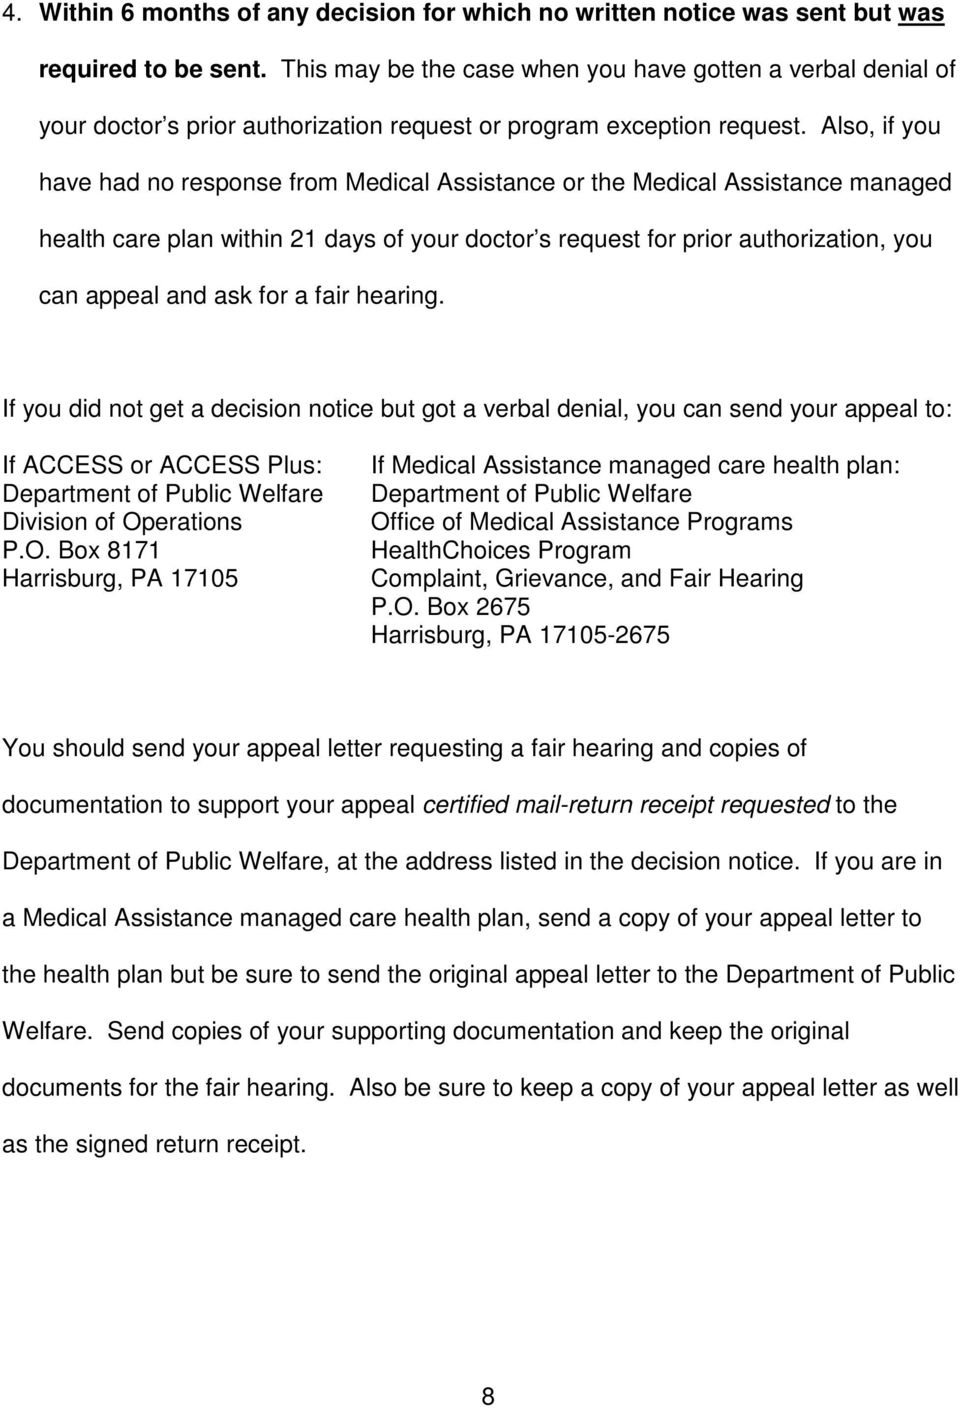 Also, if you have had no response from Medical Assistance or the Medical Assistance managed health care plan within 21 days of your doctor s request for prior authorization, you can appeal and ask